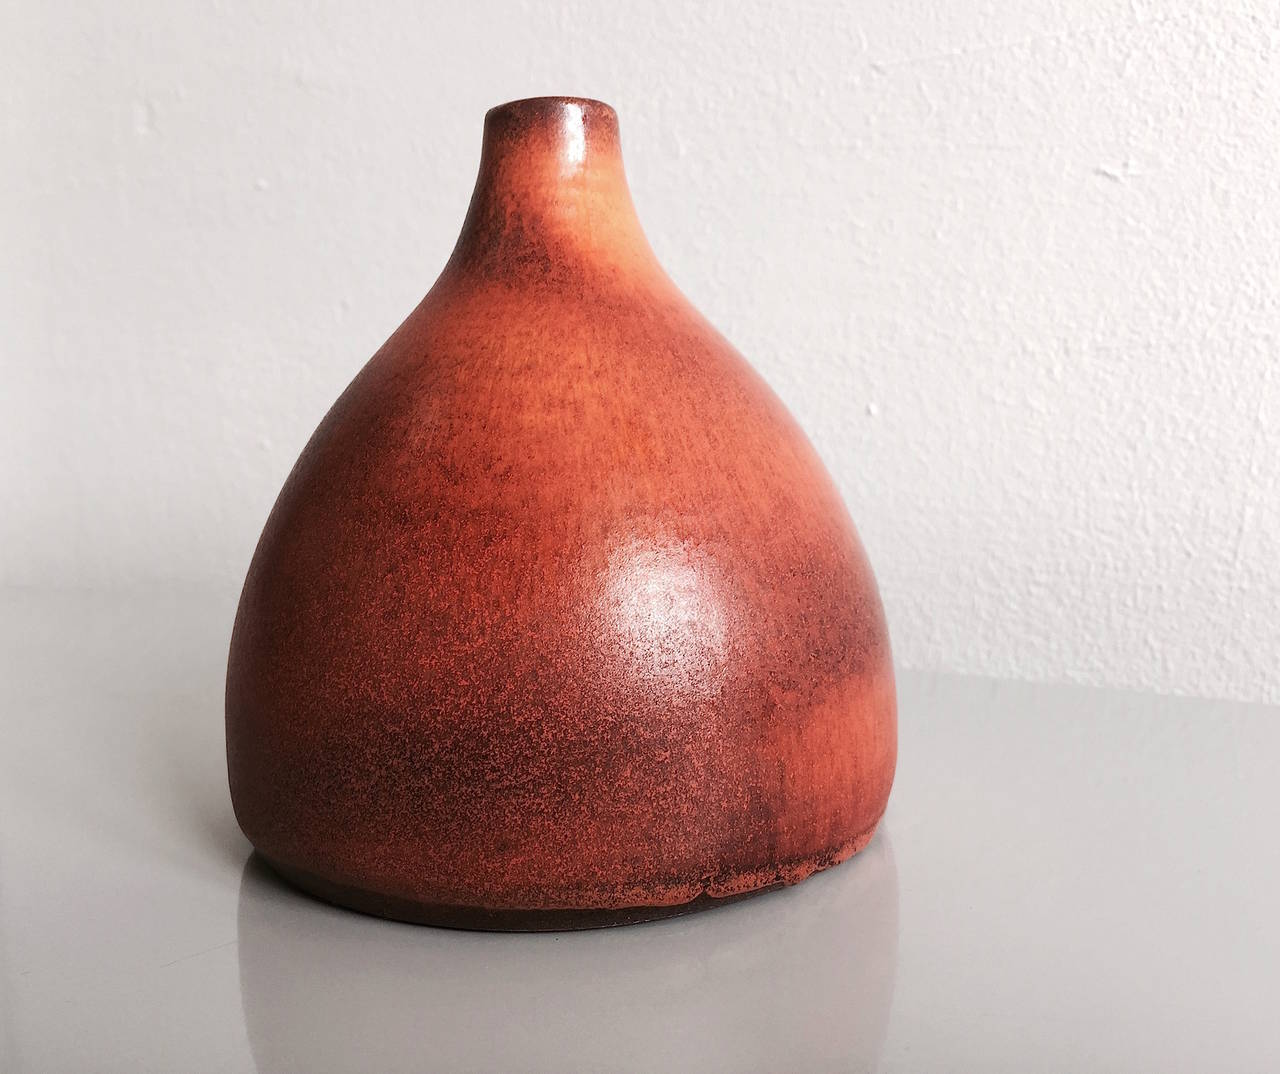 Suzanne Ramié ( 1907 - 1974) France

Ceramic vase by renowned France ceramic artist Suzanne Ramié having a red - orange fantastic glaze. The neck of the vase is light decentralized. Vallauris Clay. Incised on the bottom with the artist's